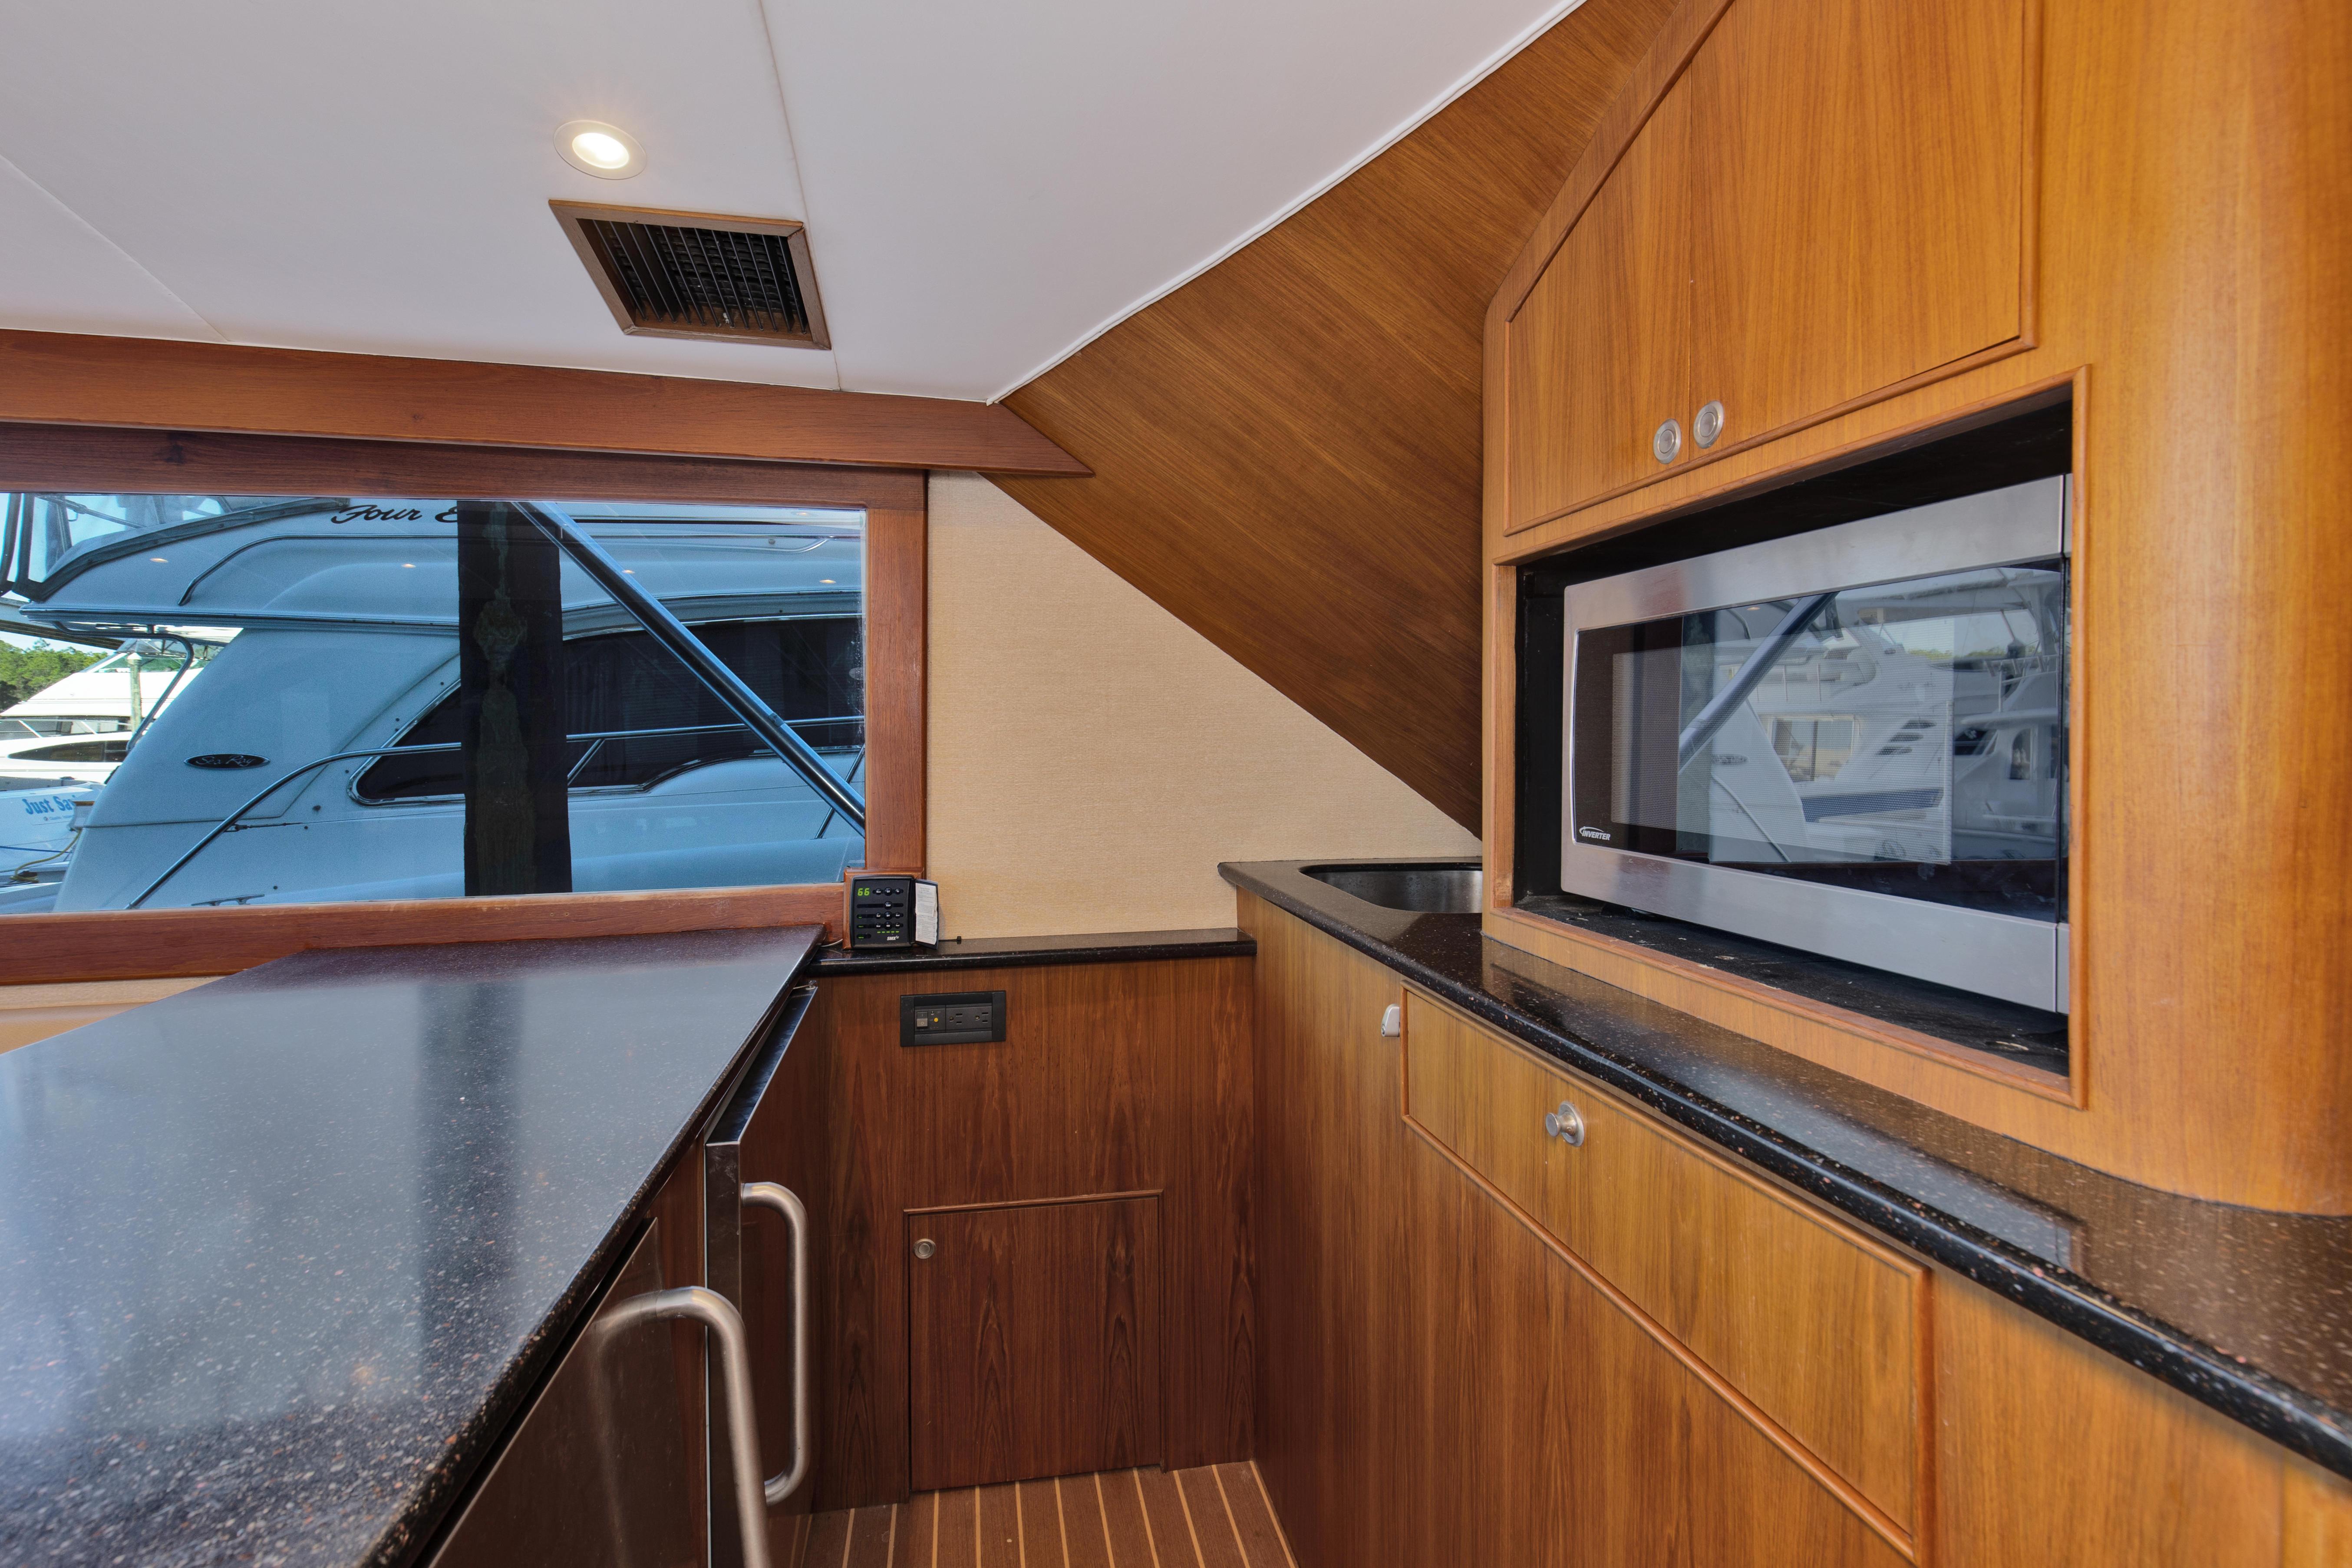 2008 51 Heritage Yachts Convertible Renegade Galley